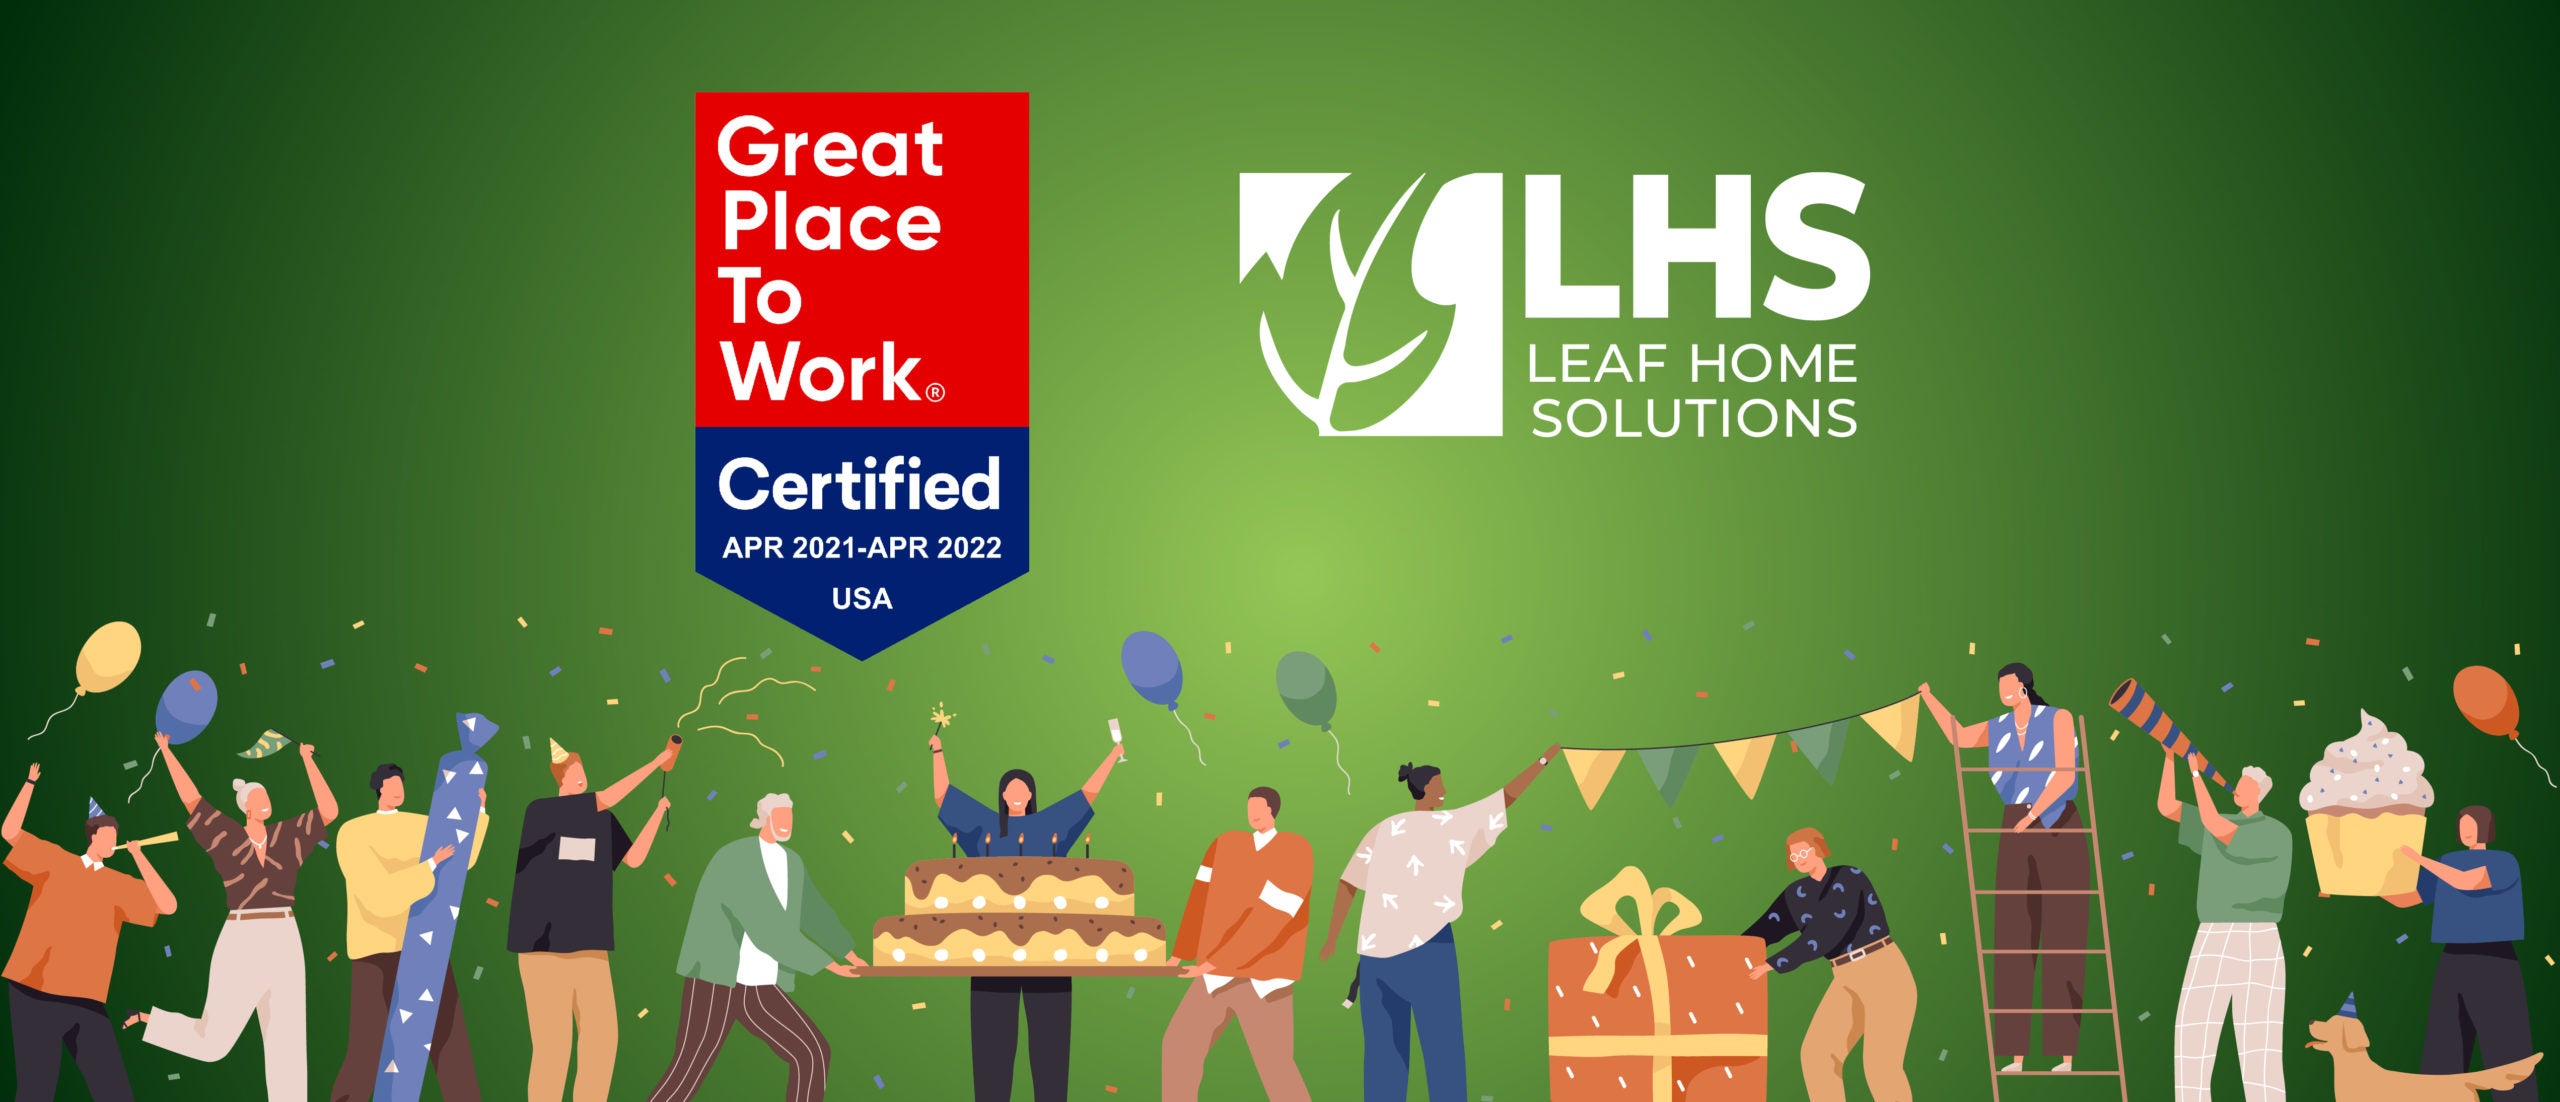 leaf home solutions graphic showcasing a great place to work award